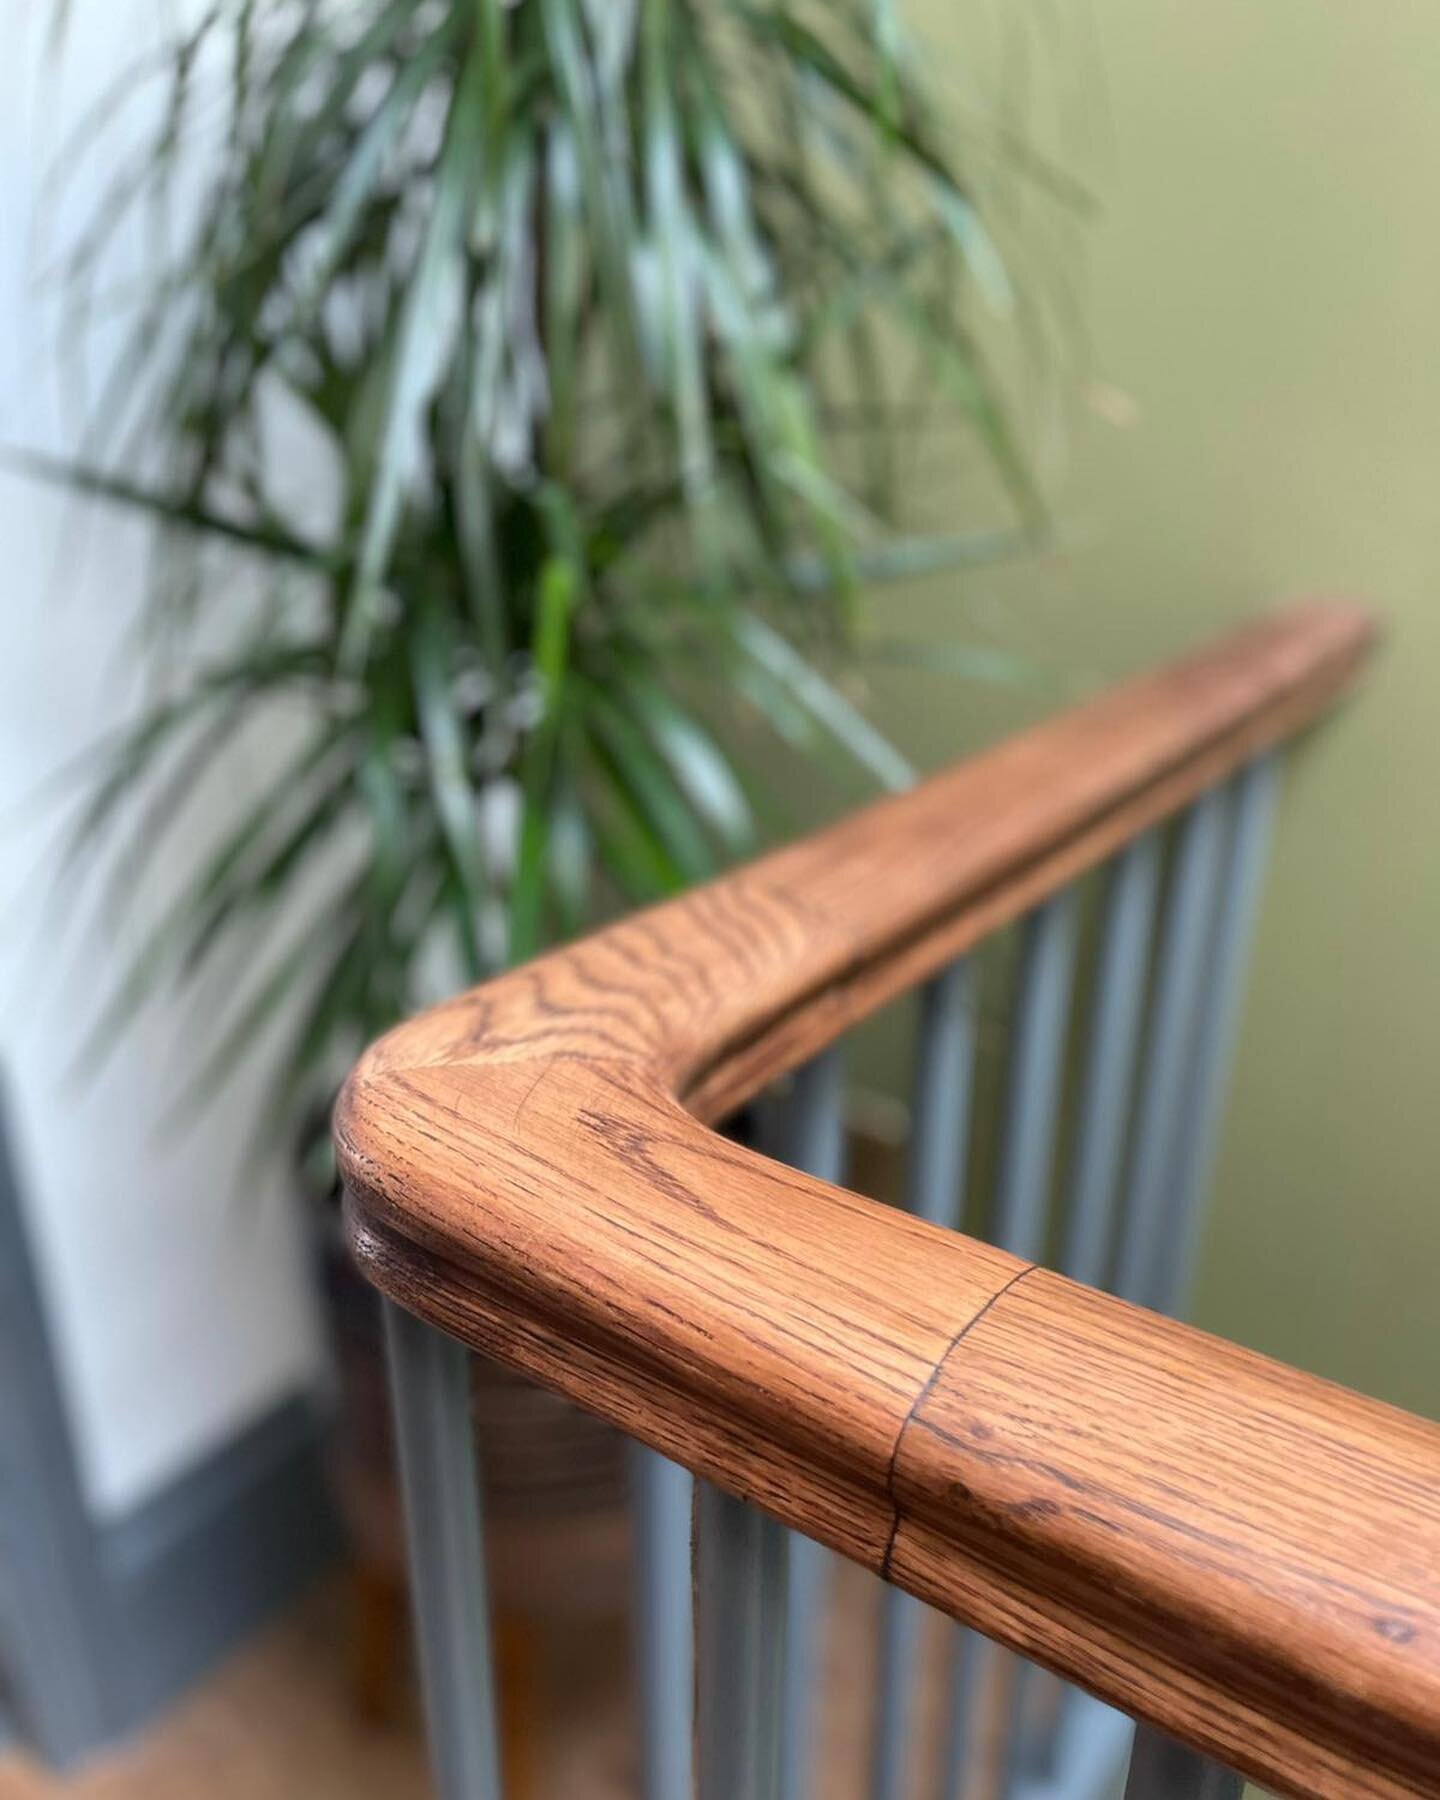 Brand new oak handrails have been finished beautifully by @devlandecor with a dark oak wax to match the new dark oak engineered flooring. 

New round timber spindles in @farrowandball downpipe make this a stand out feature in this lovely house!

#hou